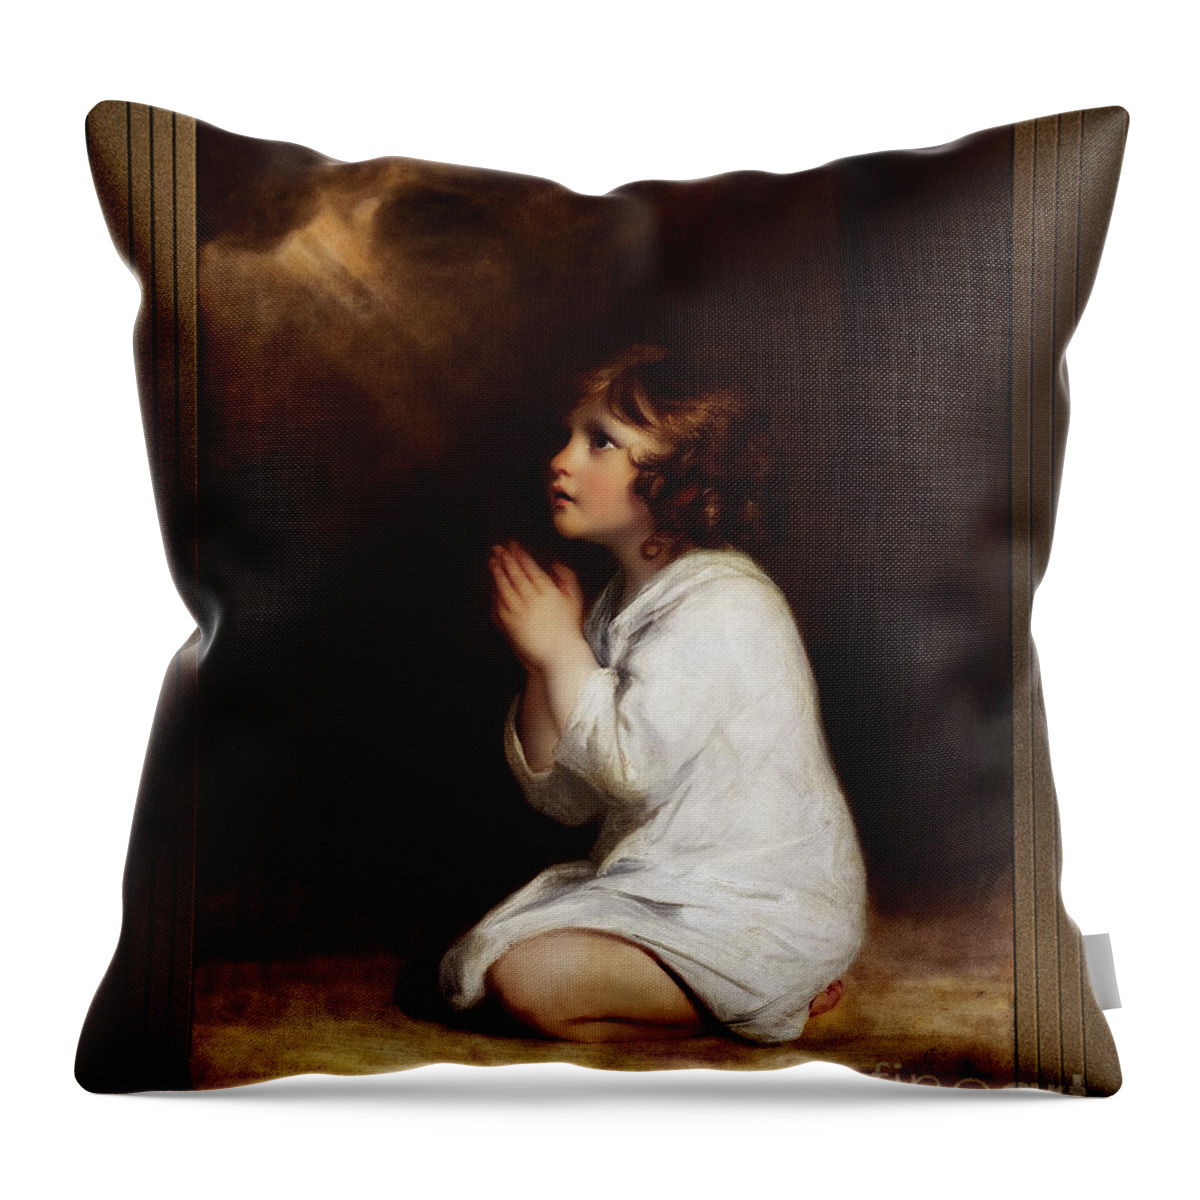 The Infant Samuel Throw Pillow featuring the painting The Infant Samuel by Joshua Reynolds Remastered Xzendor7 Fine Art Classical Reproductions by Xzendor7